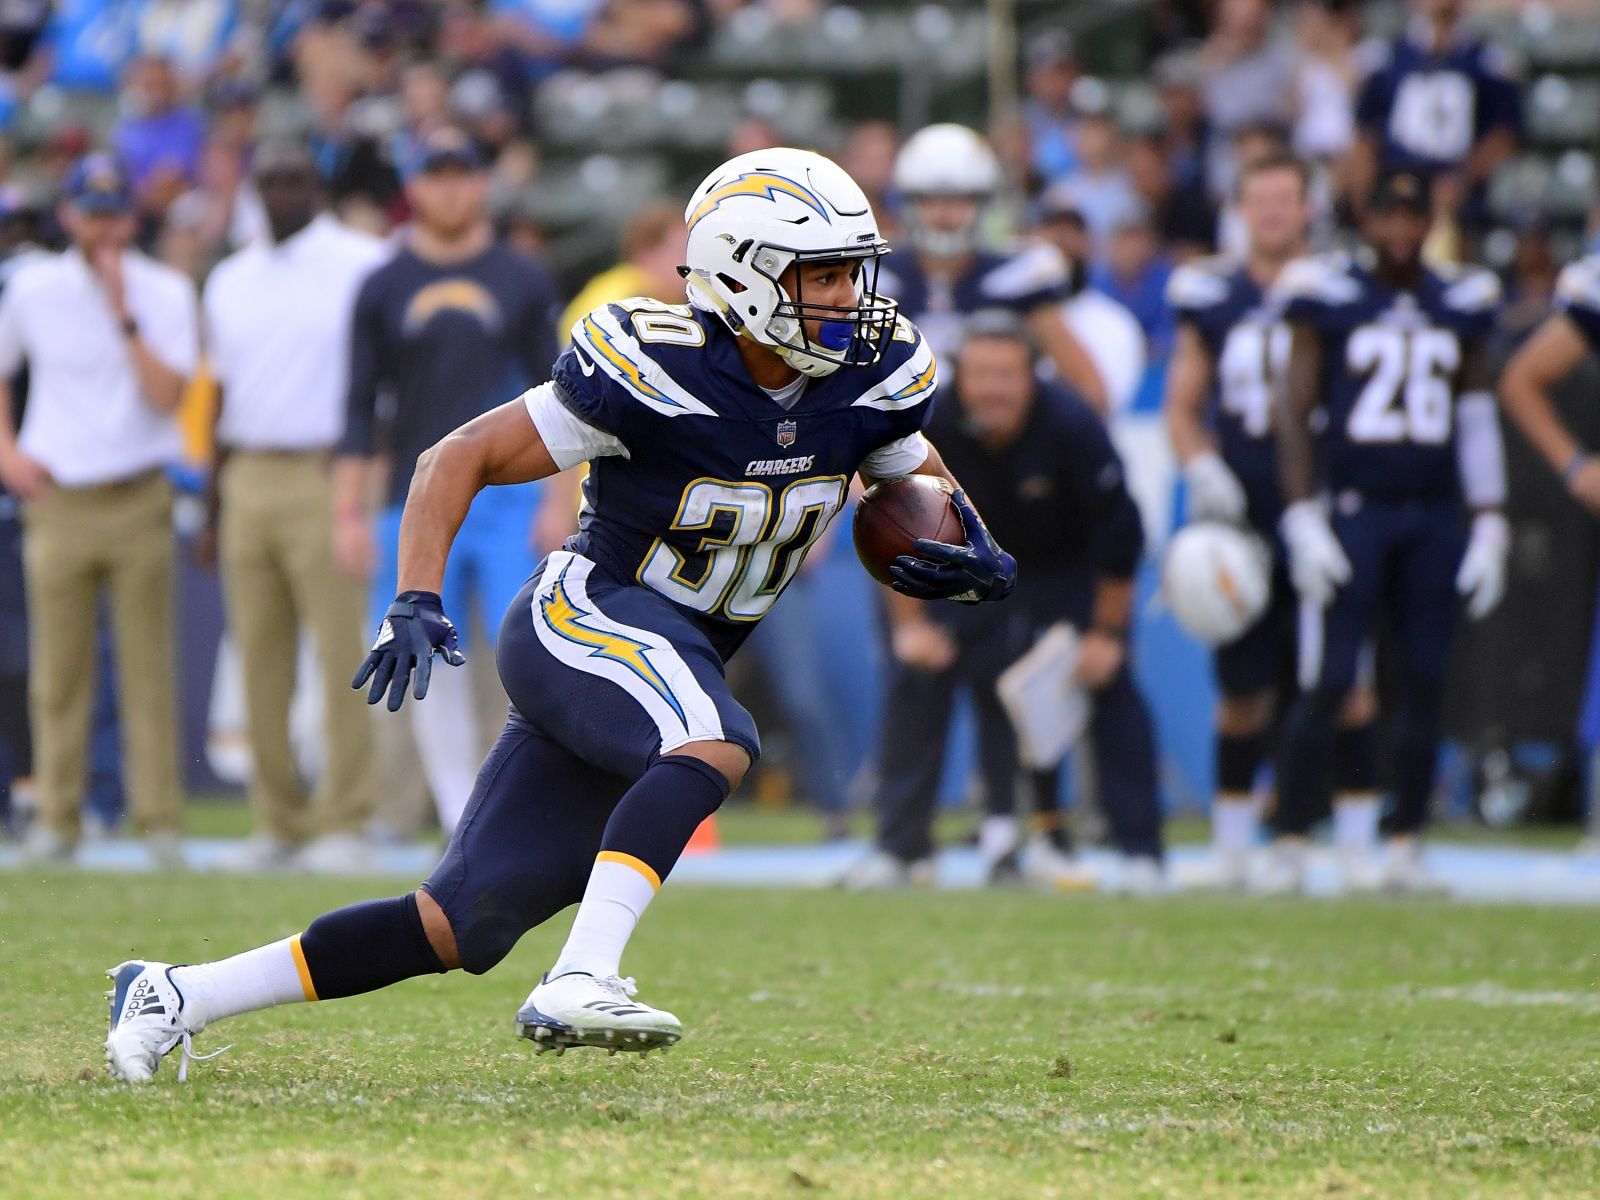 Will Austin Ekeler or Justin Jackson Step Up in 2019?